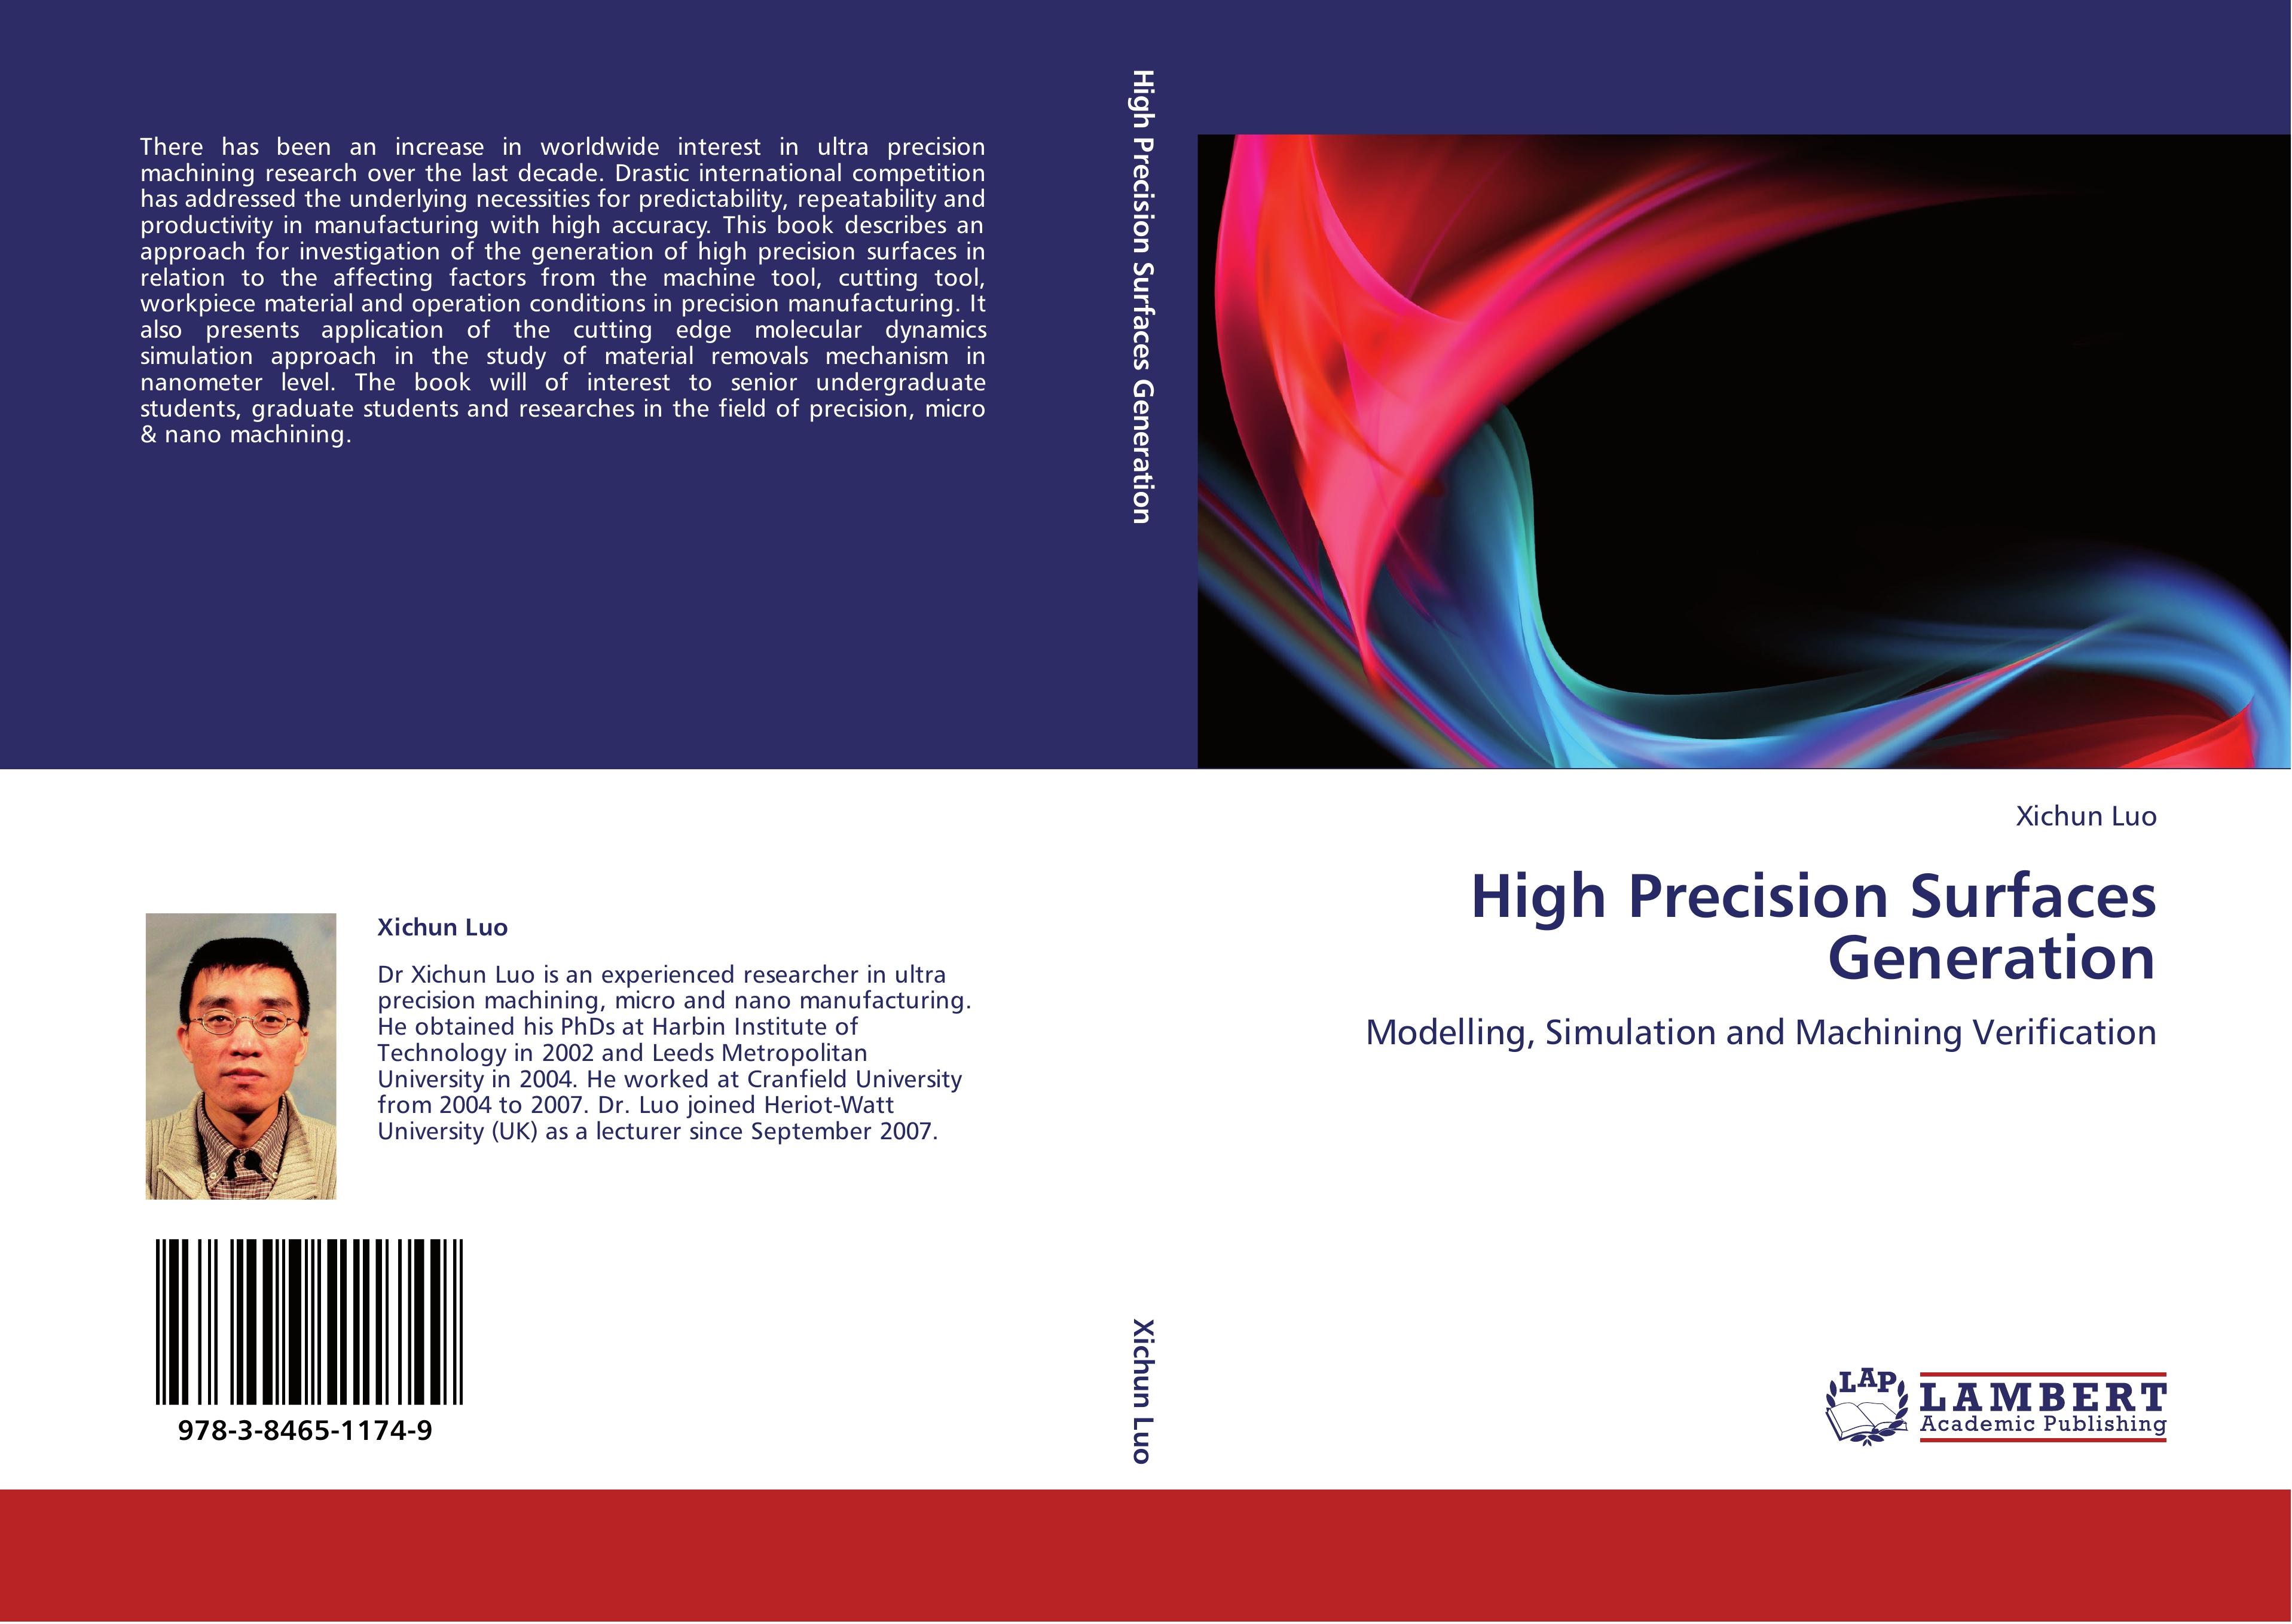 High Precision Surfaces Generation - Xichun Luo